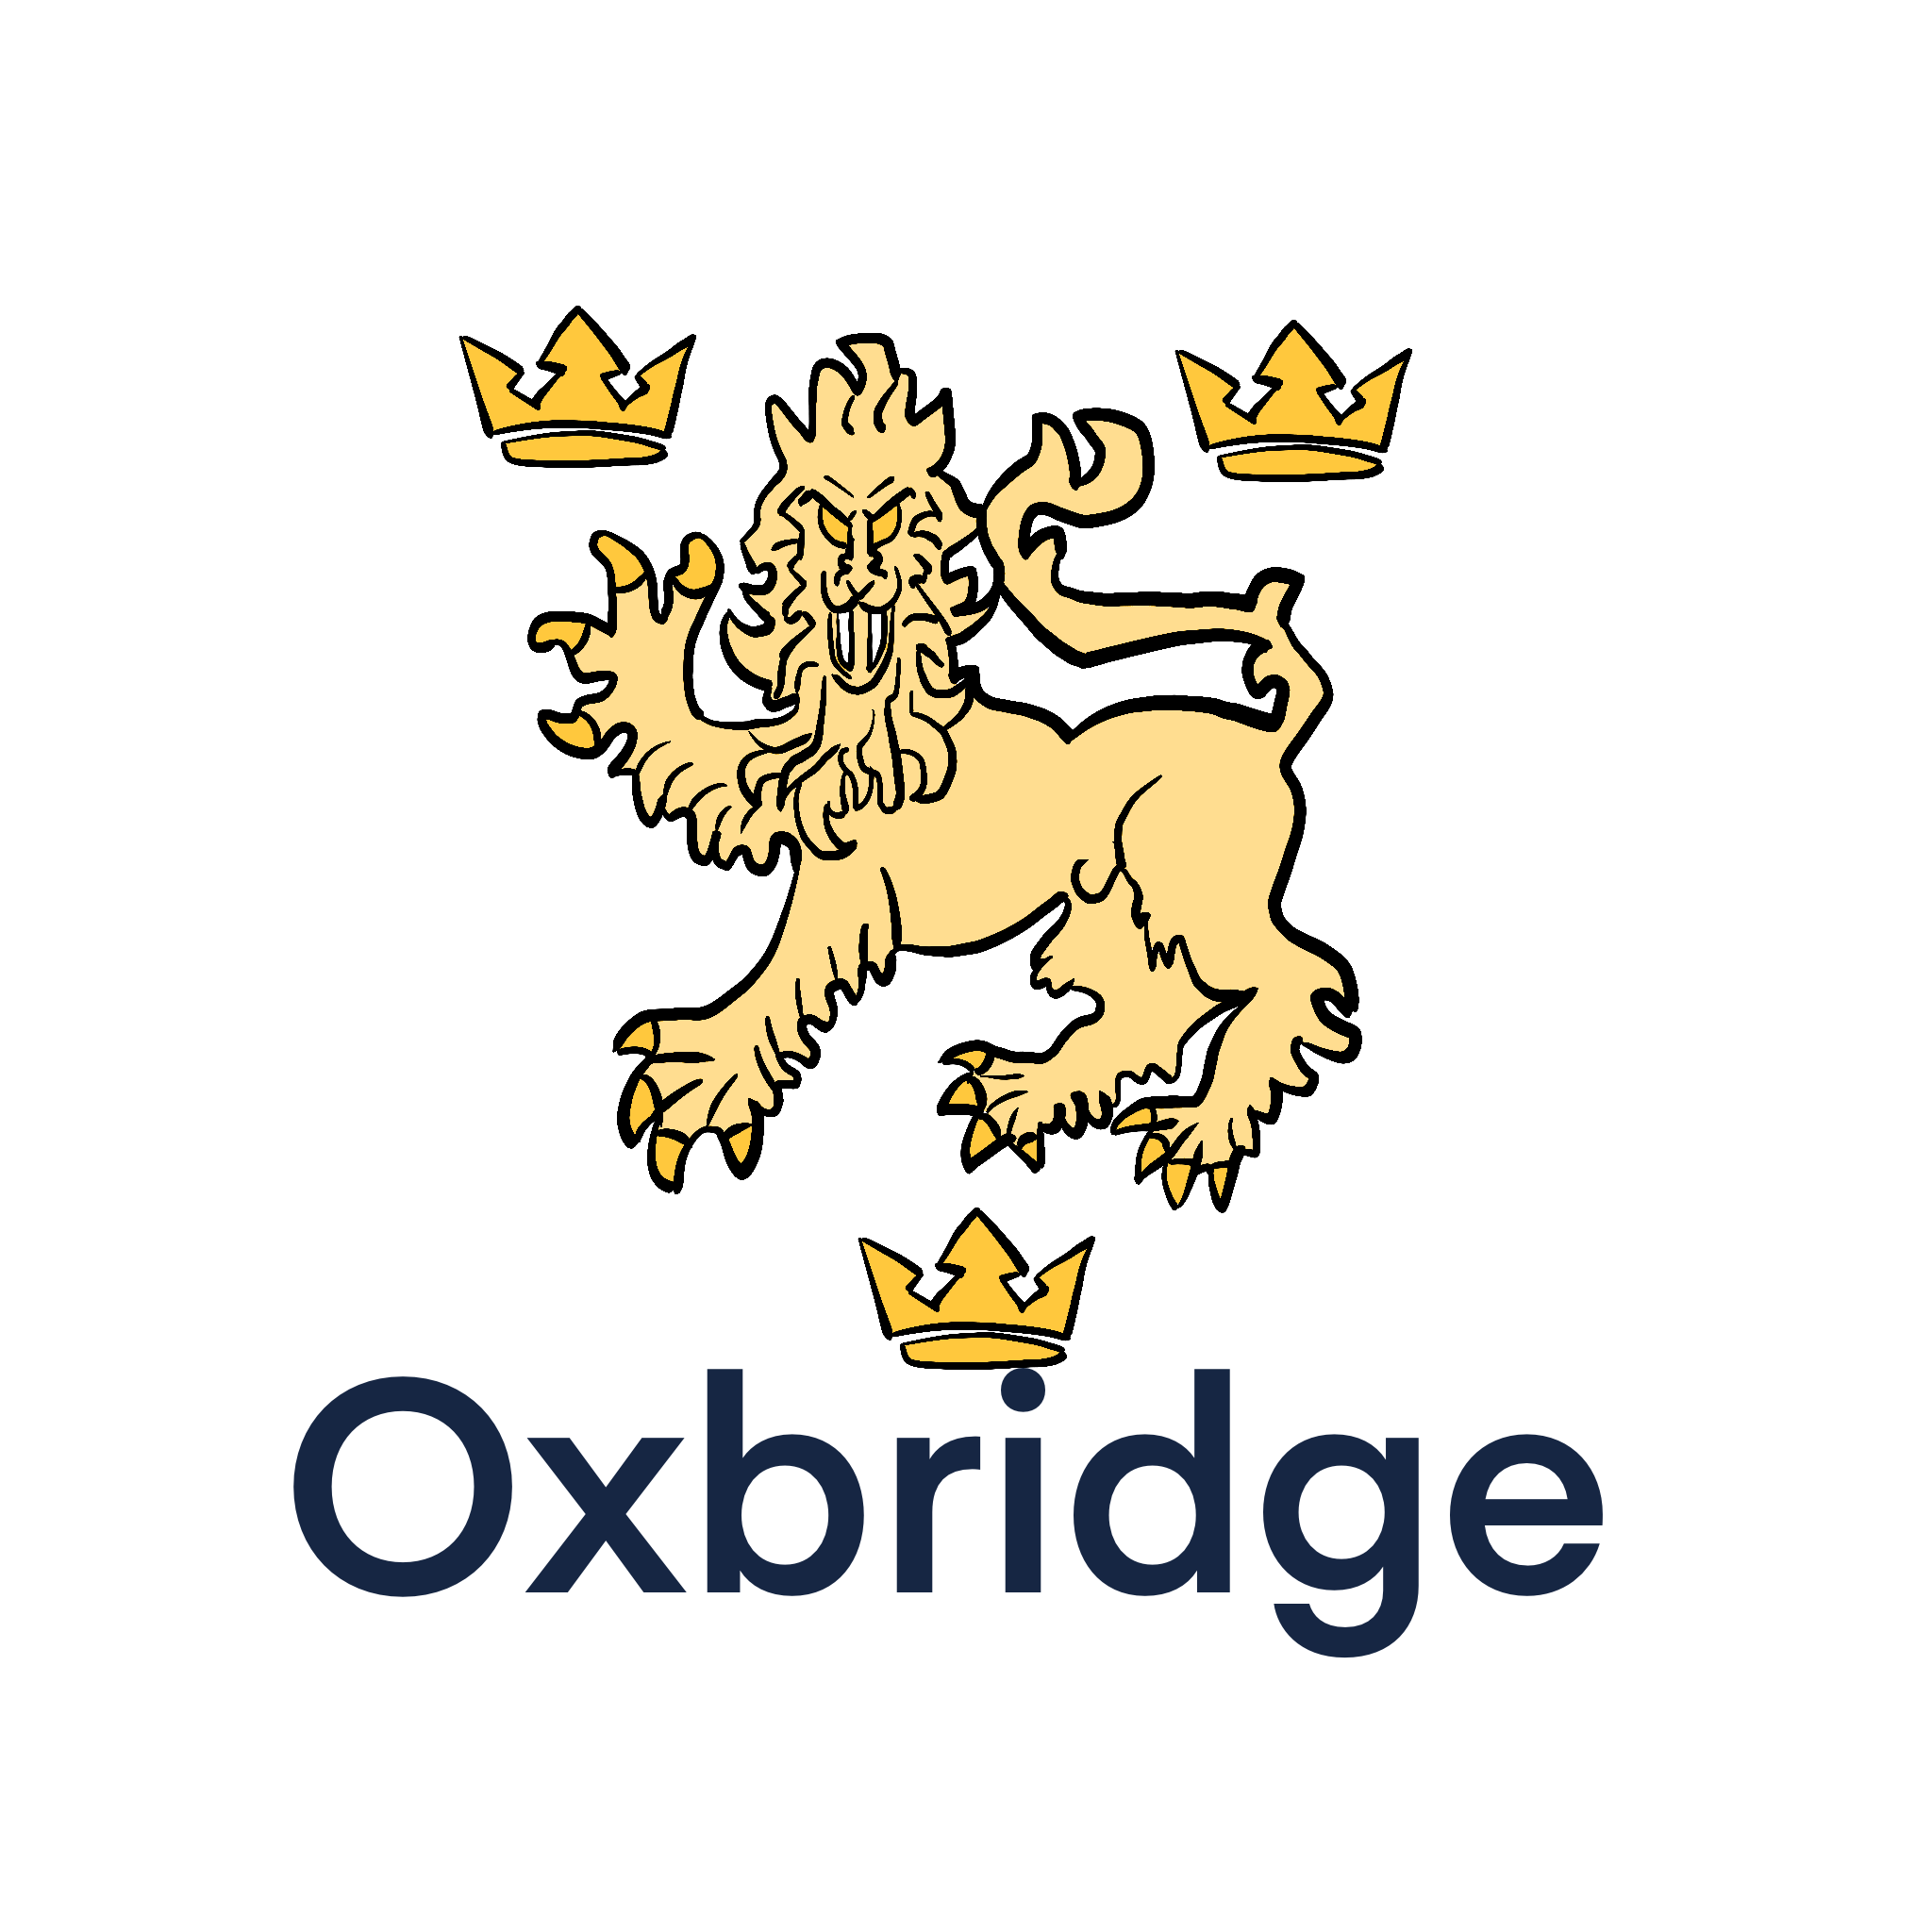 Isabel holds a degree from Oxbridge